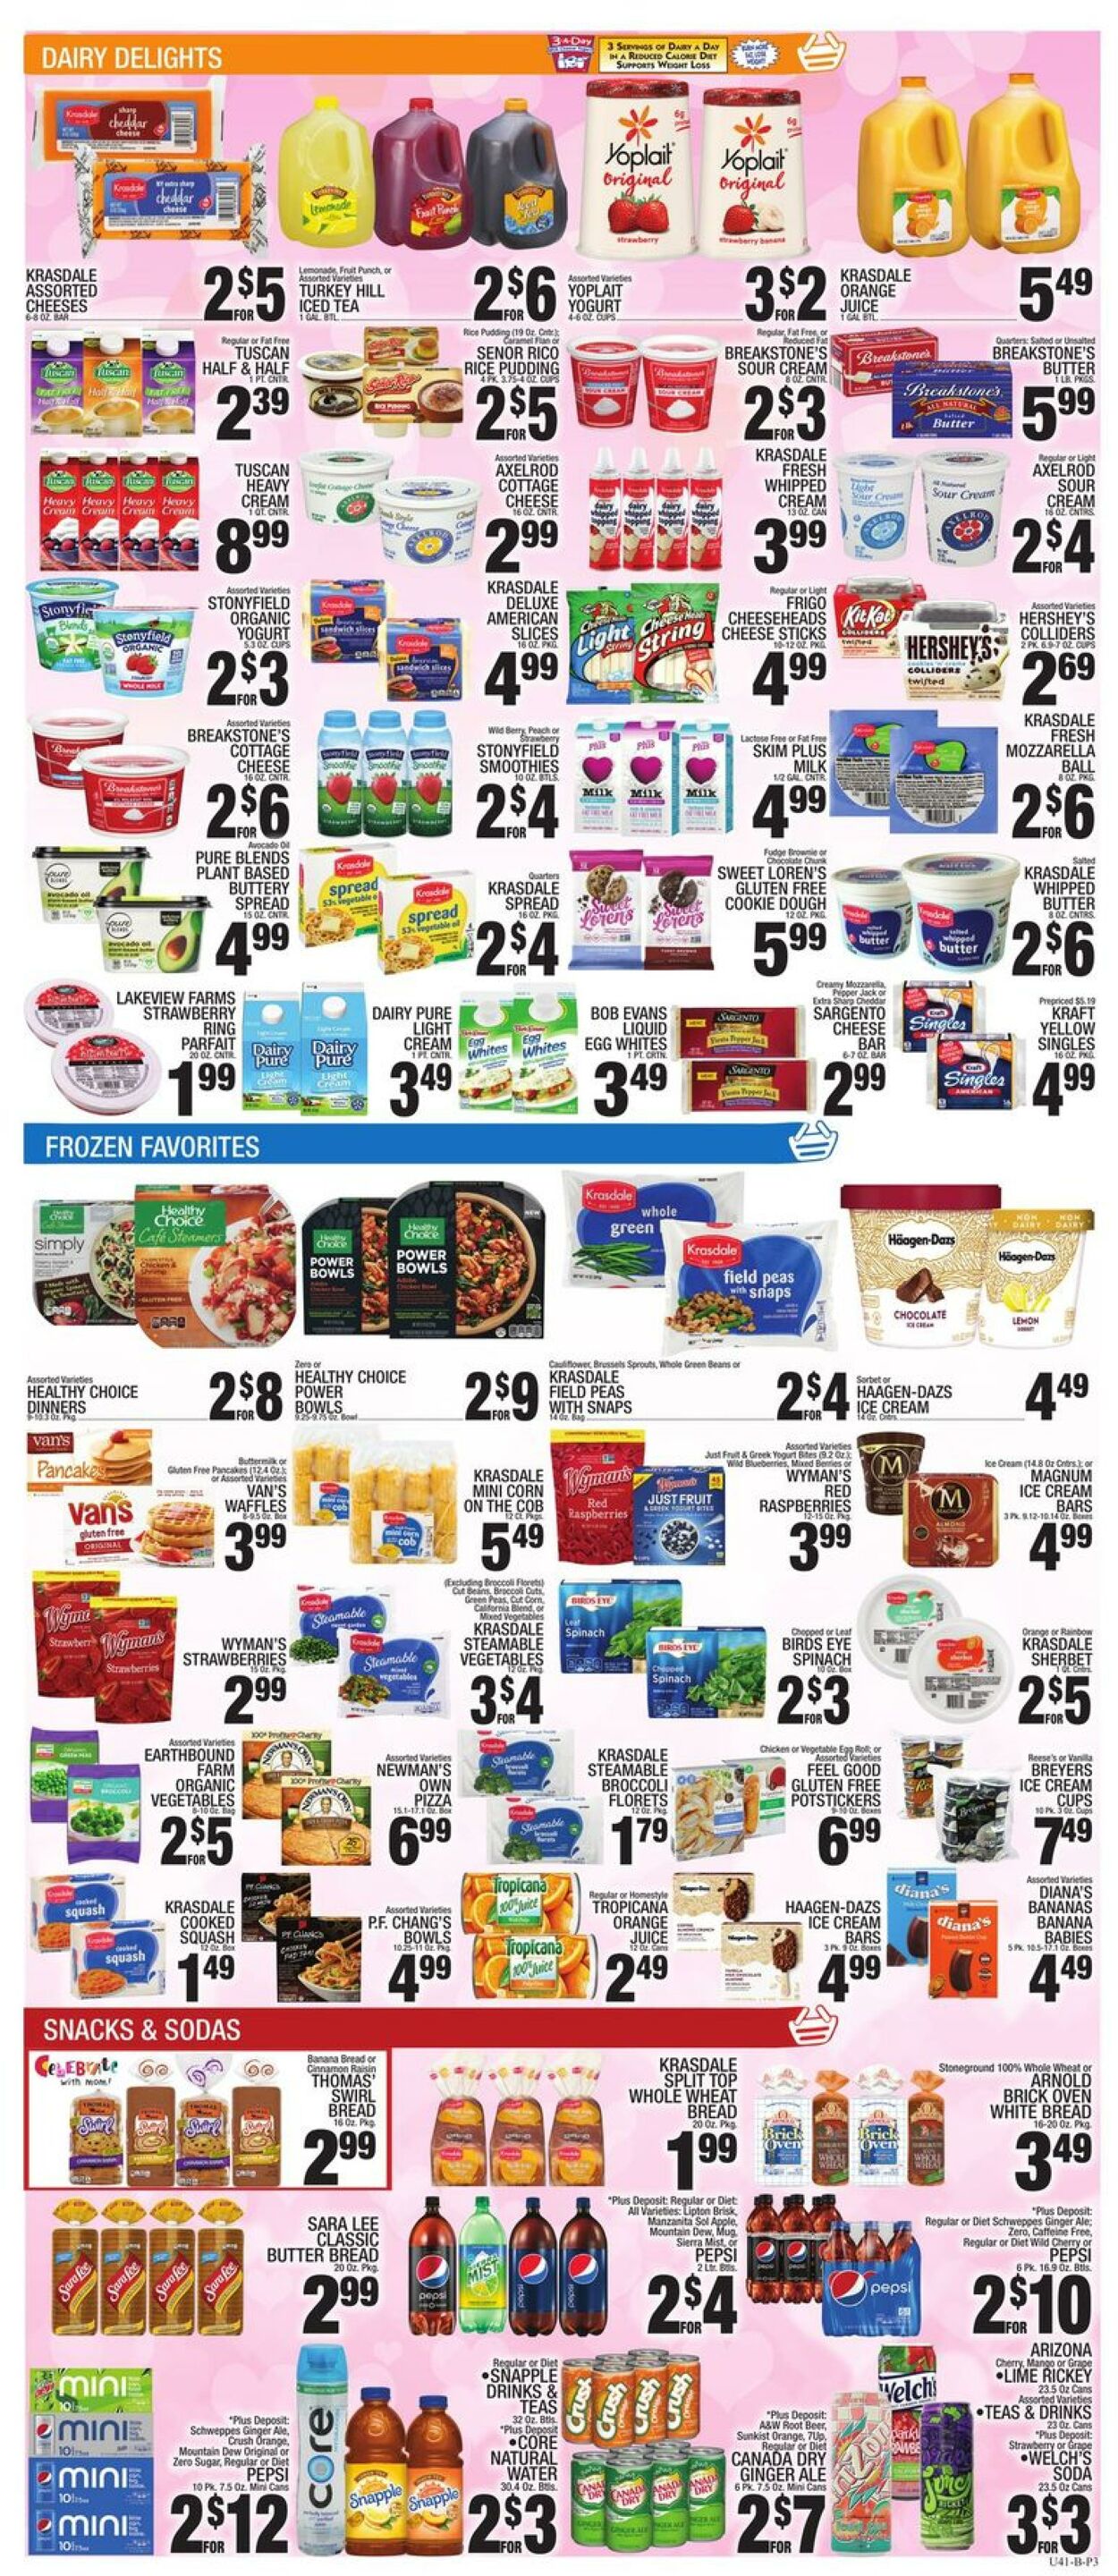 Weekly ad CTown 05/06/2022 - 05/12/2022